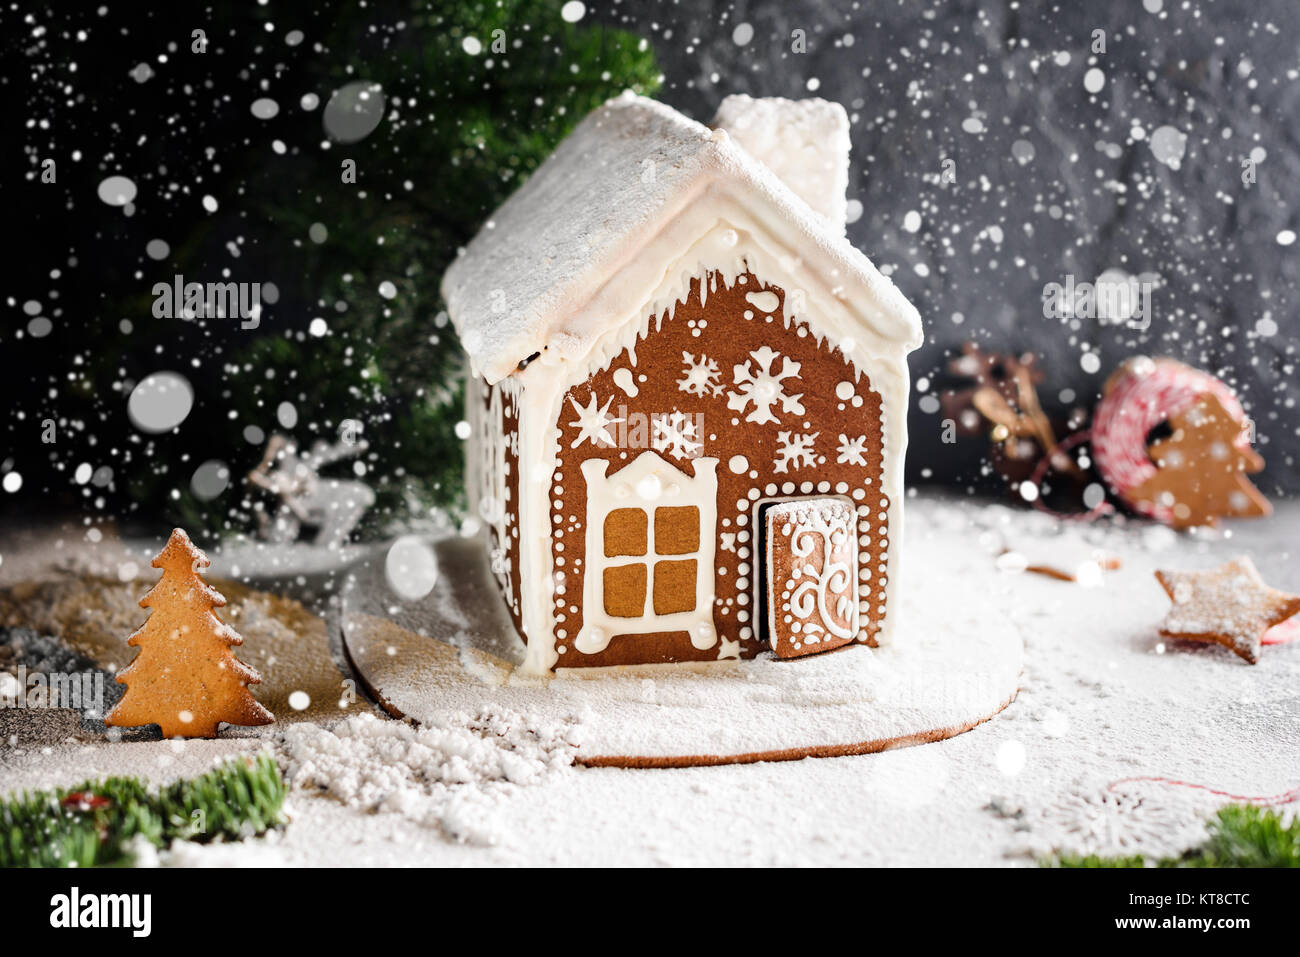 Homemade gingerbread house, falling snow and festive Christmas decorations. Christmas card, winter still life. Copy space for text Stock Photo